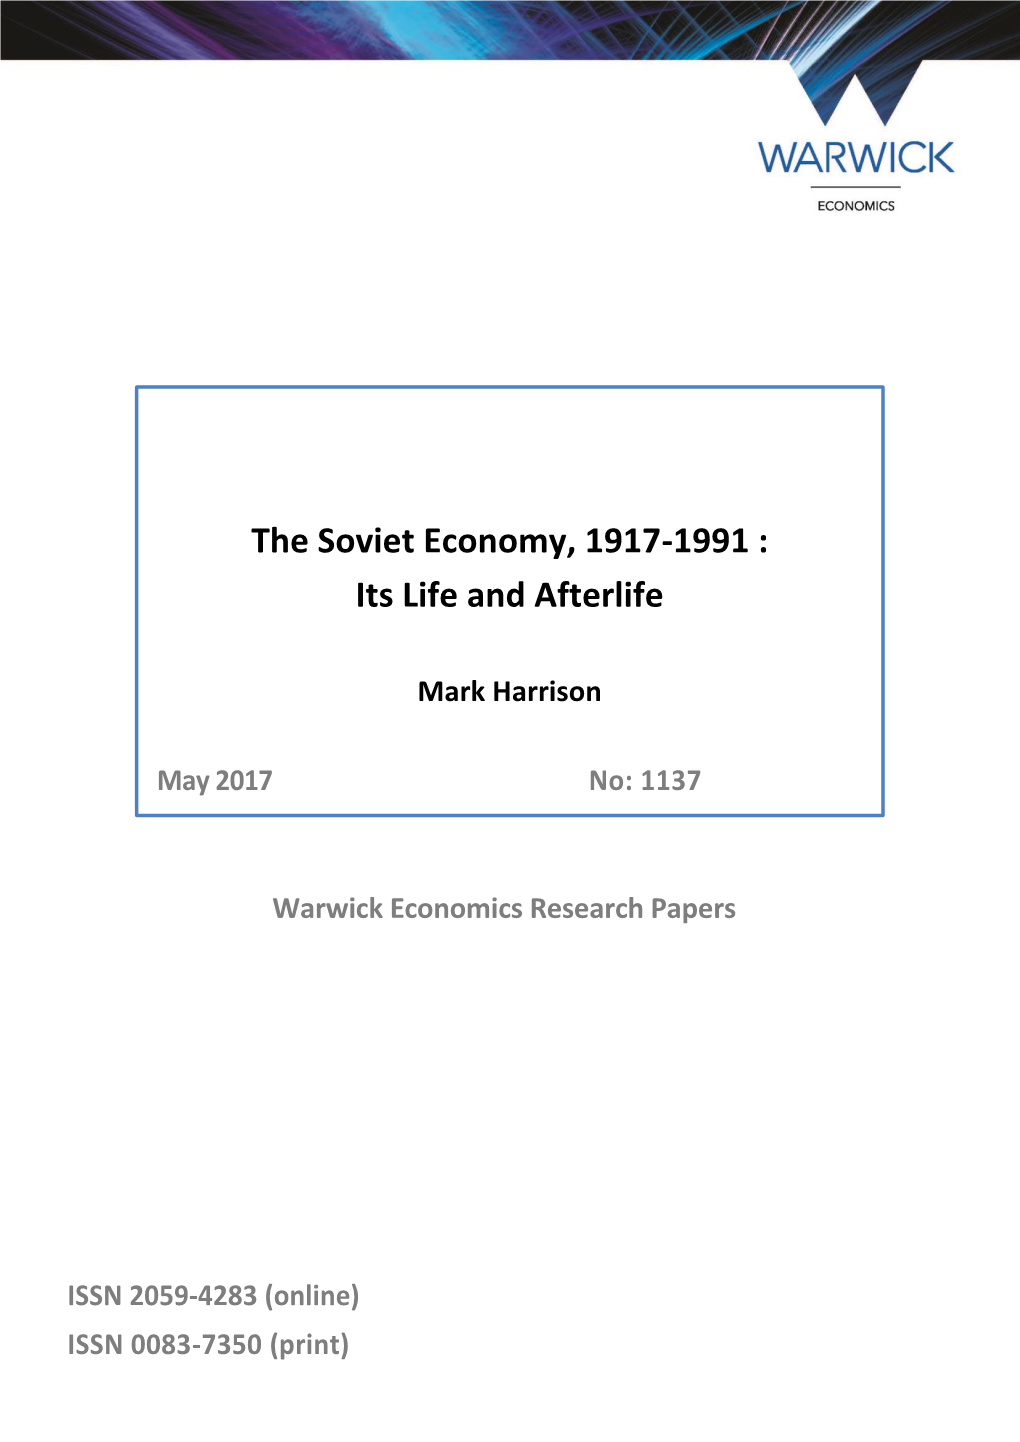 The Soviet Economy, 1917-1991 : Its Life and Afterlife